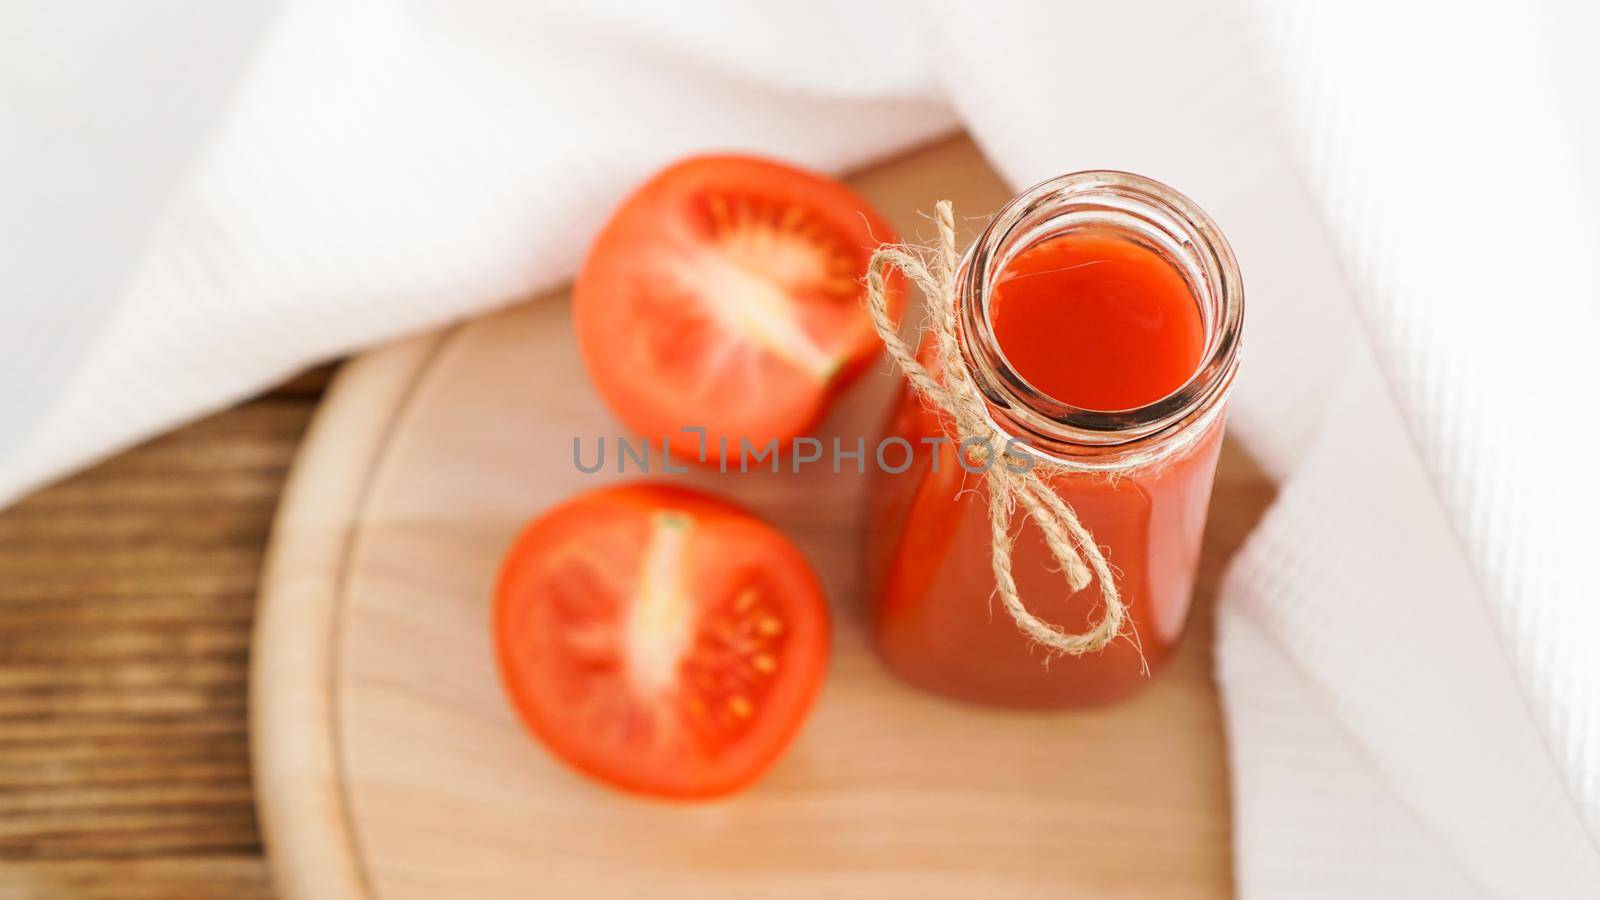 Tomato juice in glass bottle and fresh tomatoes on wooden background by natali_brill